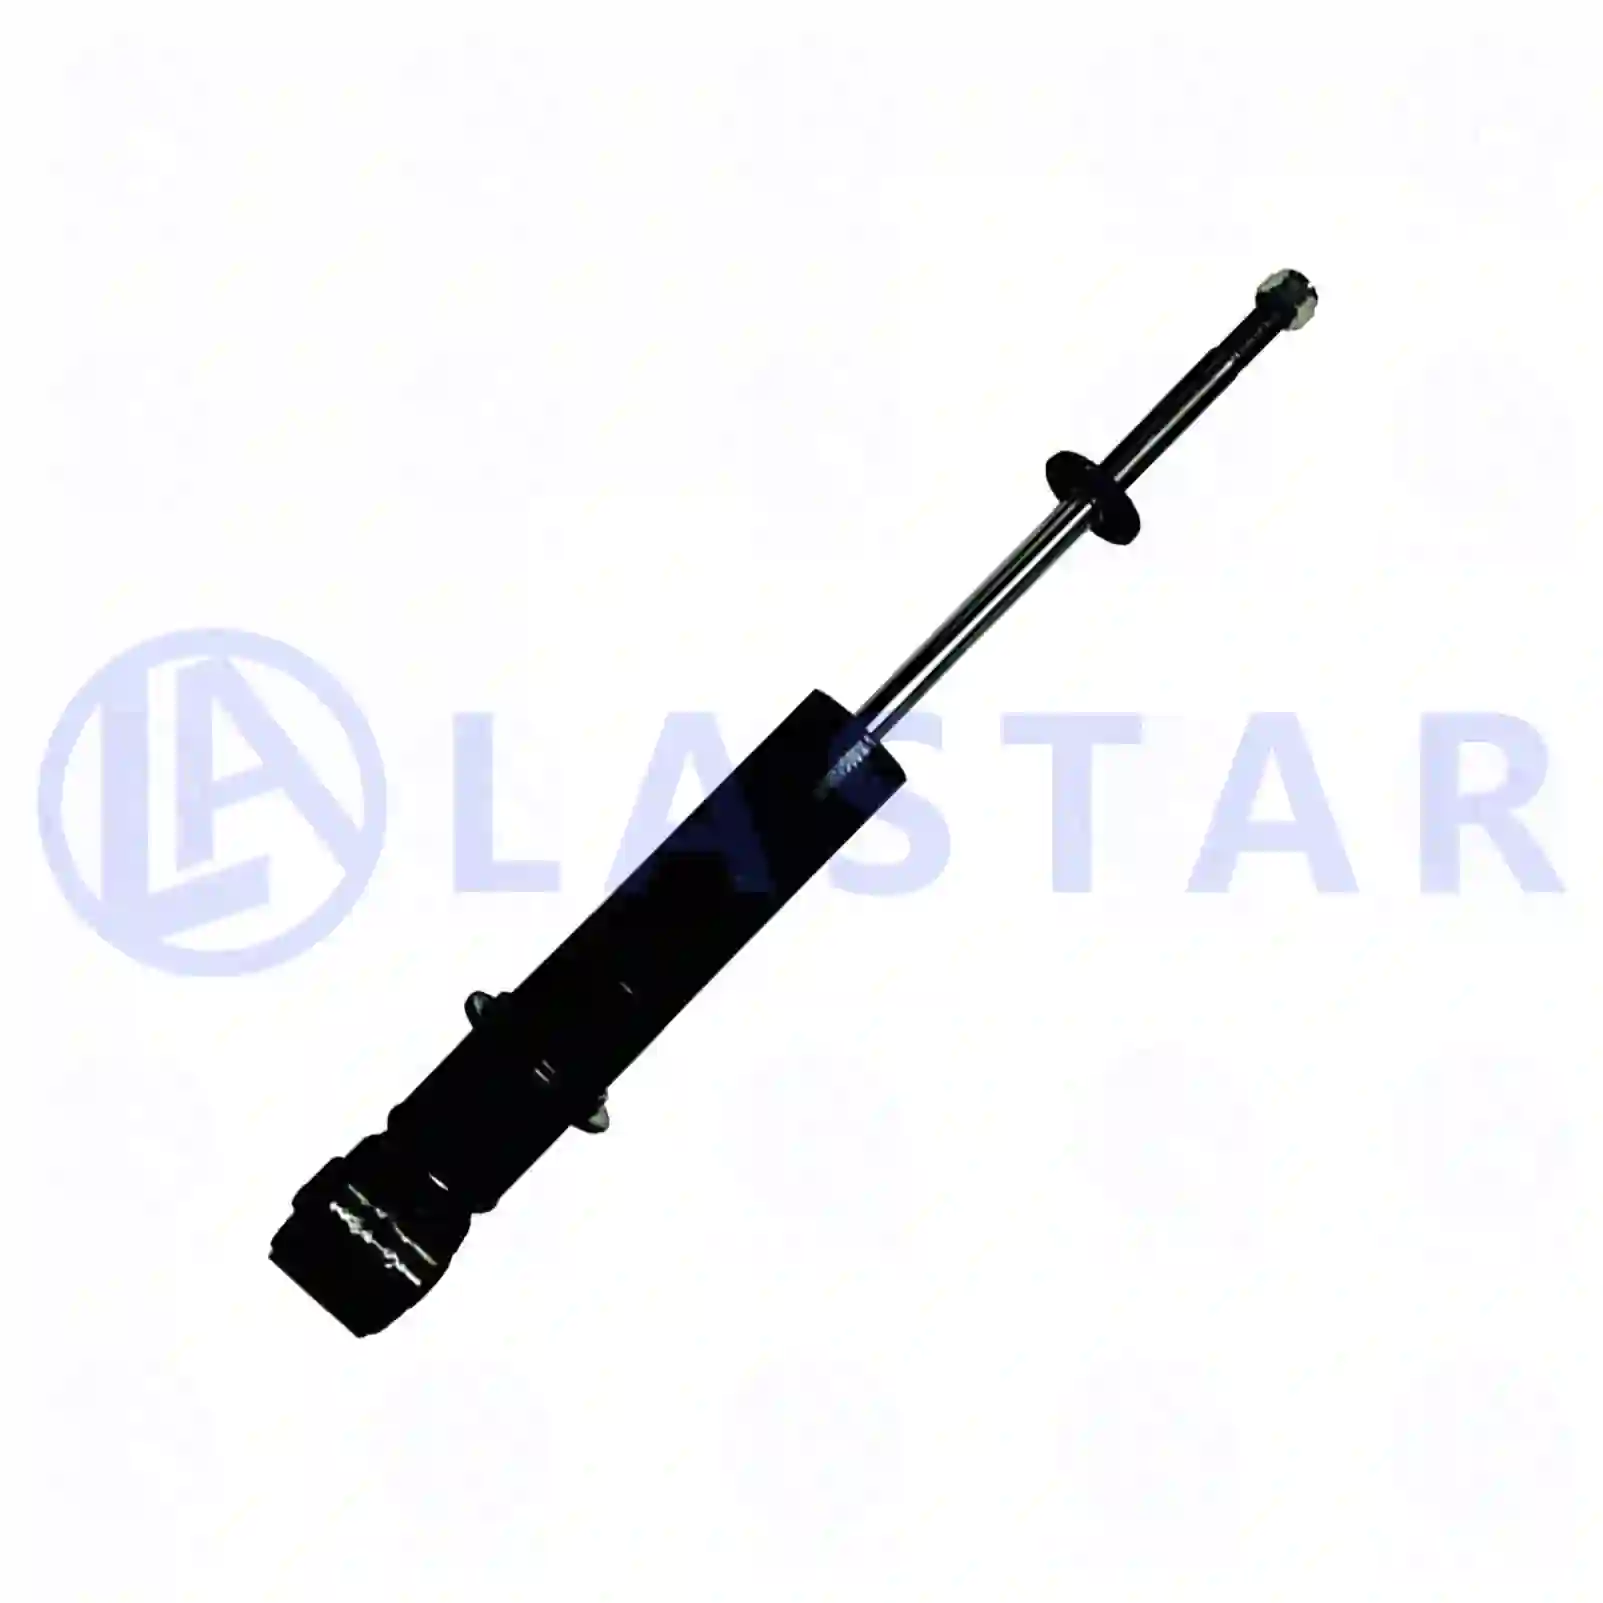 Cabin shock absorber, 77735811, 1910106, , , , , ||  77735811 Lastar Spare Part | Truck Spare Parts, Auotomotive Spare Parts Cabin shock absorber, 77735811, 1910106, , , , , ||  77735811 Lastar Spare Part | Truck Spare Parts, Auotomotive Spare Parts